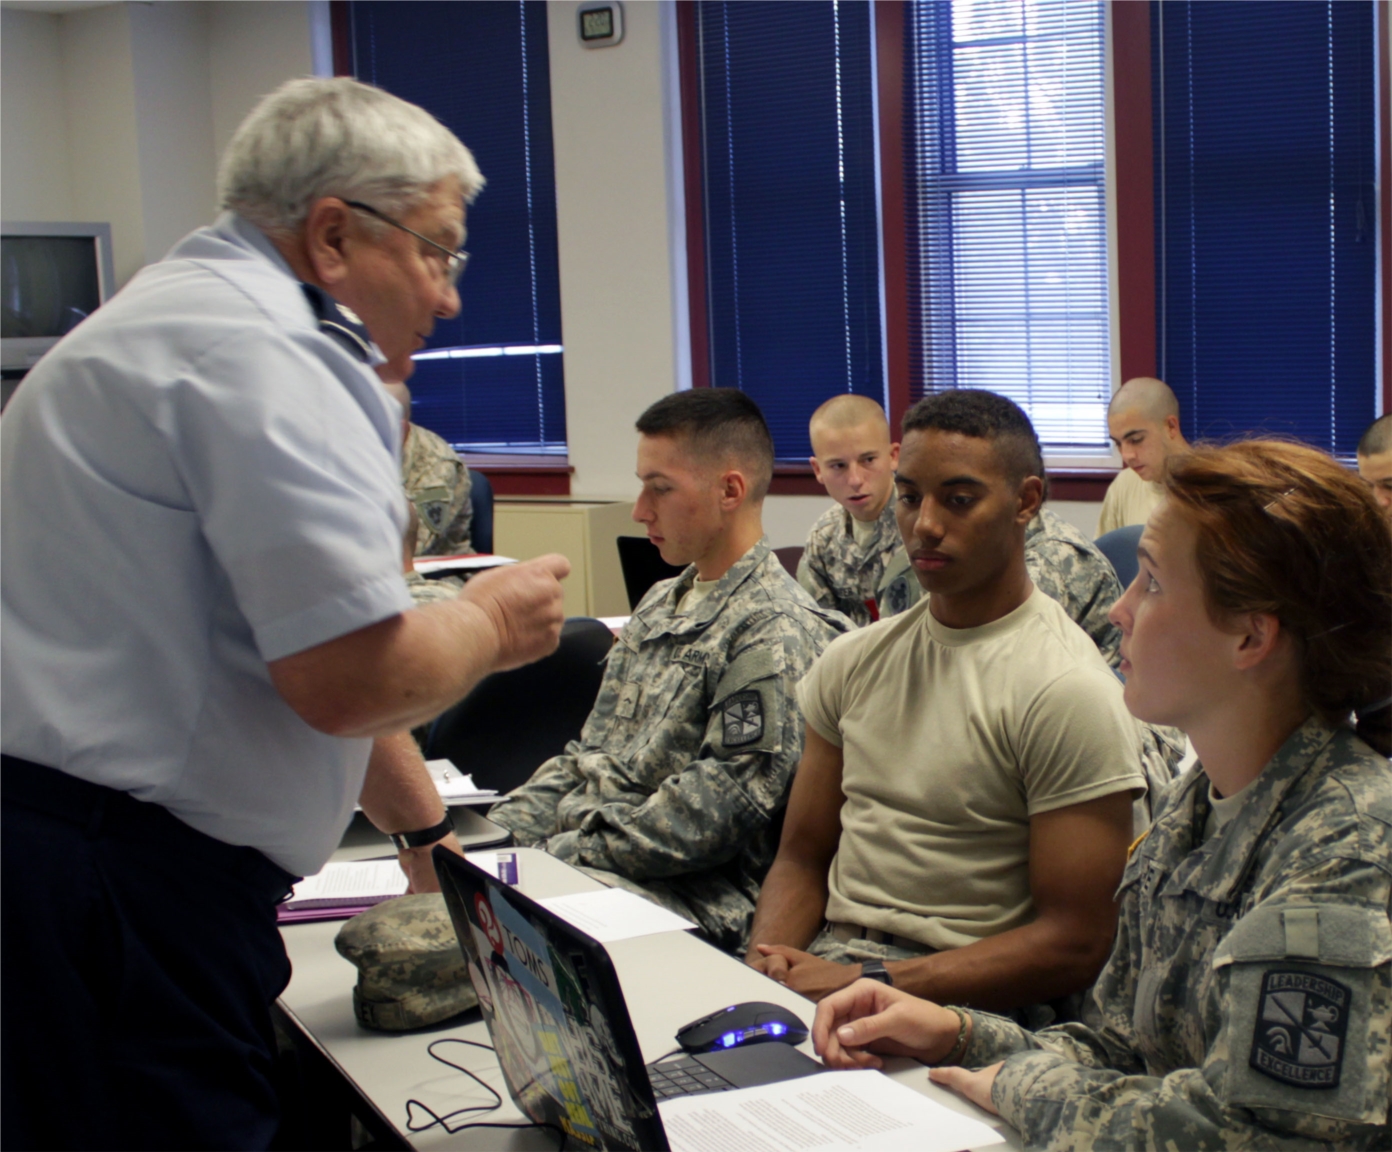 In the classroom, in the Corps of Cadets, or on the playing fields, leadership and character are on display by instructors and cadets alike.